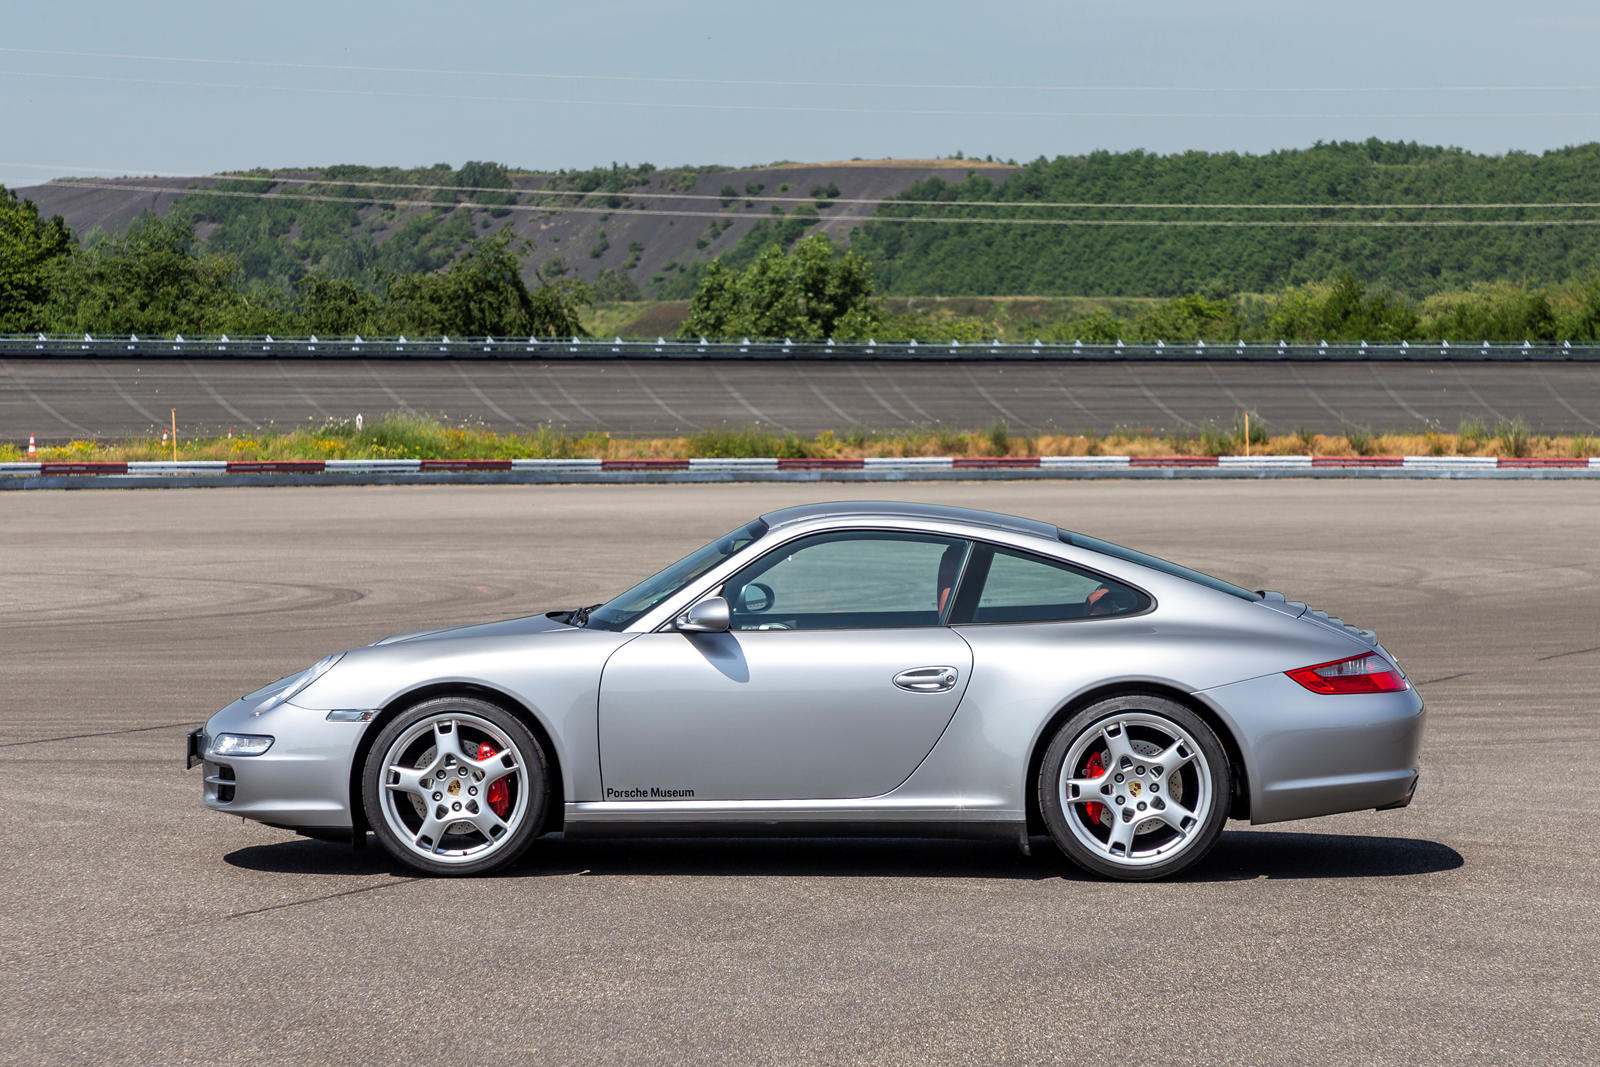 Now Is The Best Time To Buy A Porsche 911 (997)